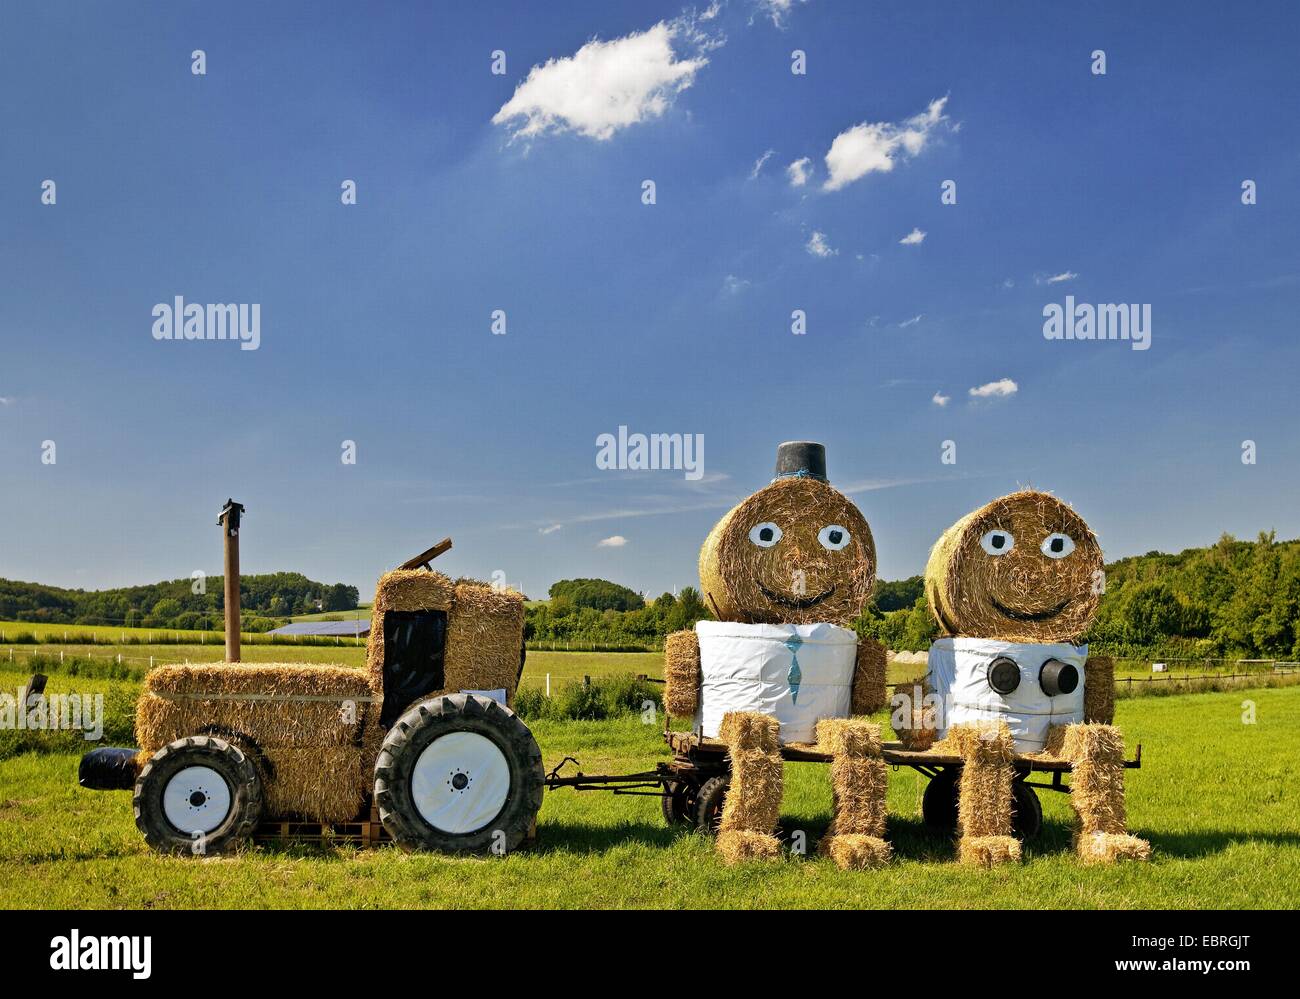 tractor and a couple made of bales of straw, Germany, North Rhine-Westphalia, Coesfeld Stock Photo